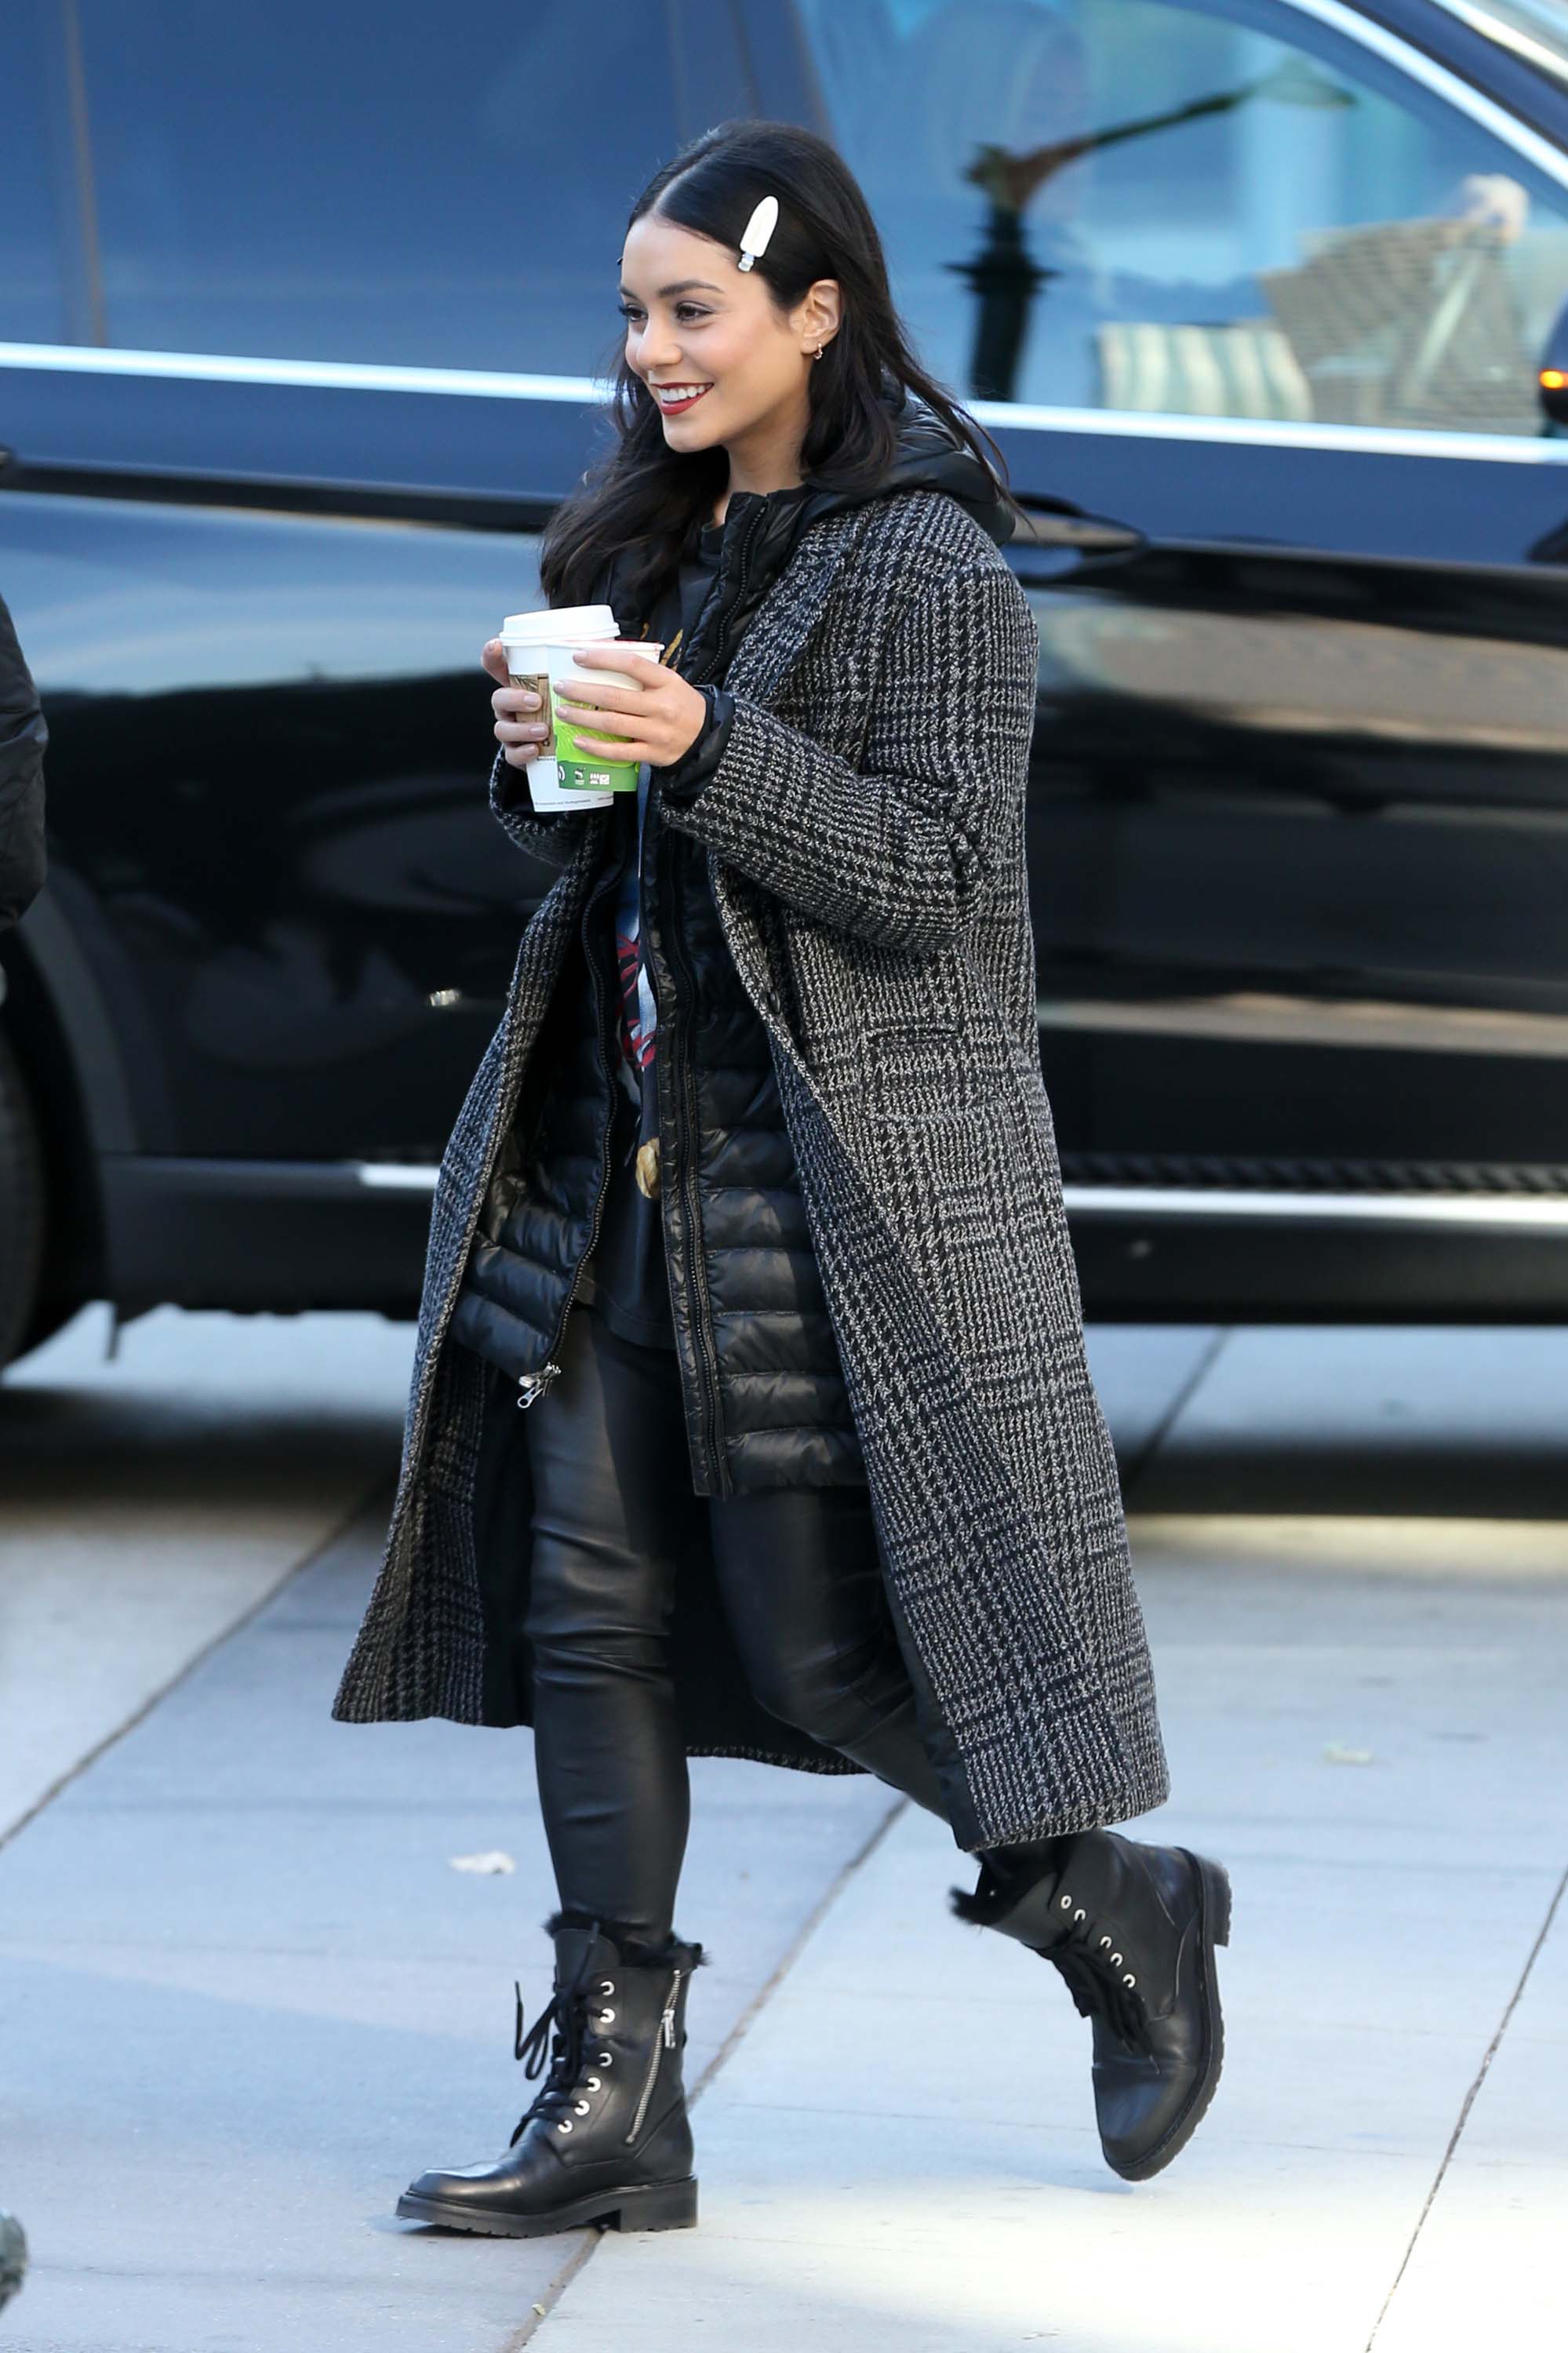 Vanessa Hudgens on the set of ‘Second Act’